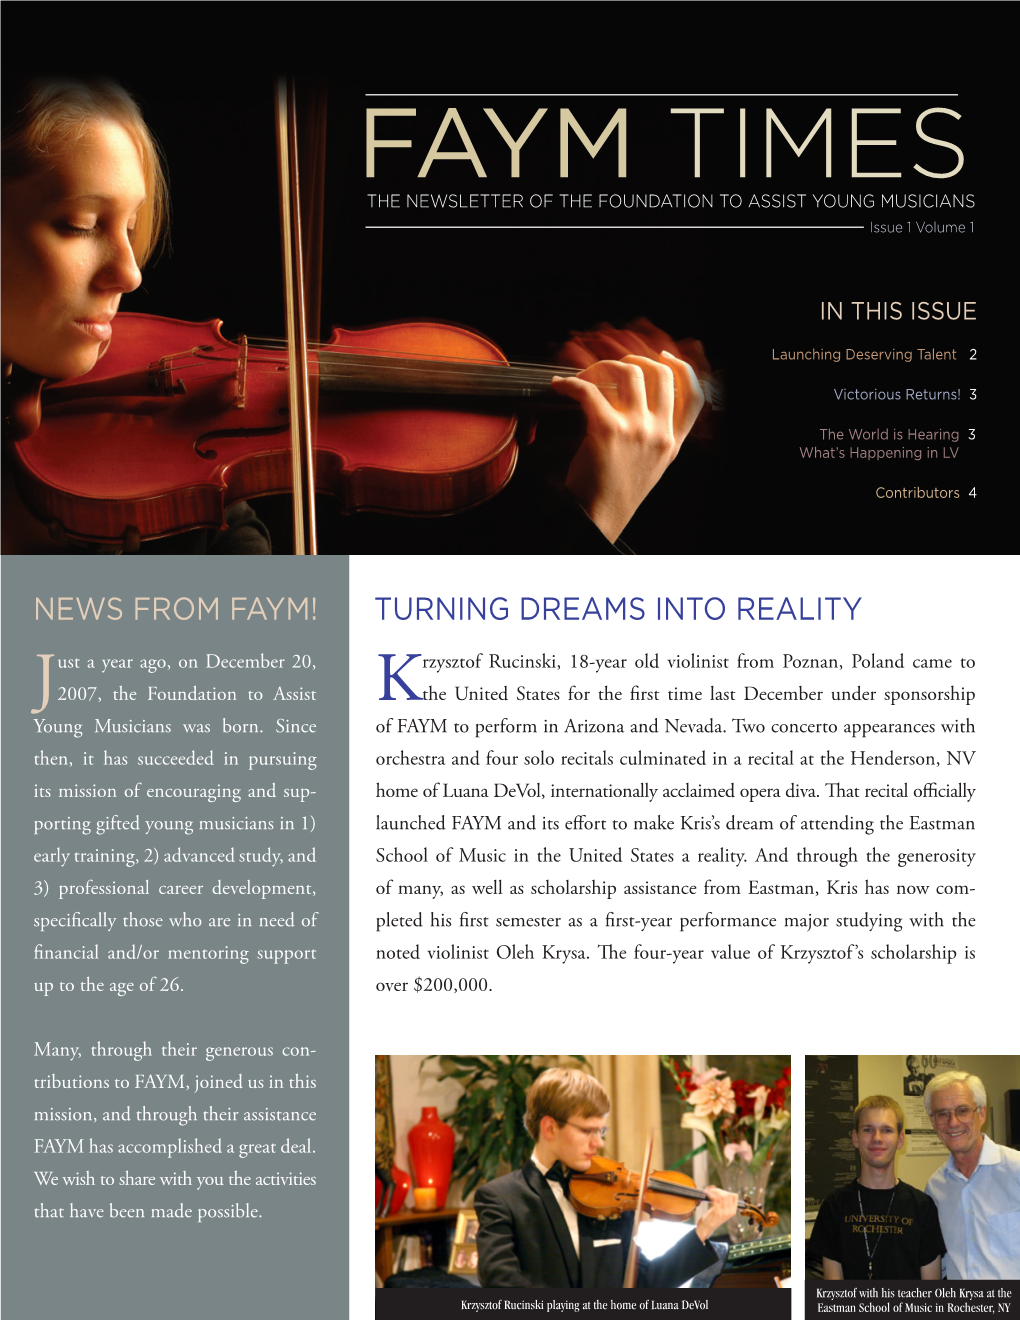 FAYM Times the Newsletter of the Foundation to Assist Young Musicians Issue 1 Volume 1